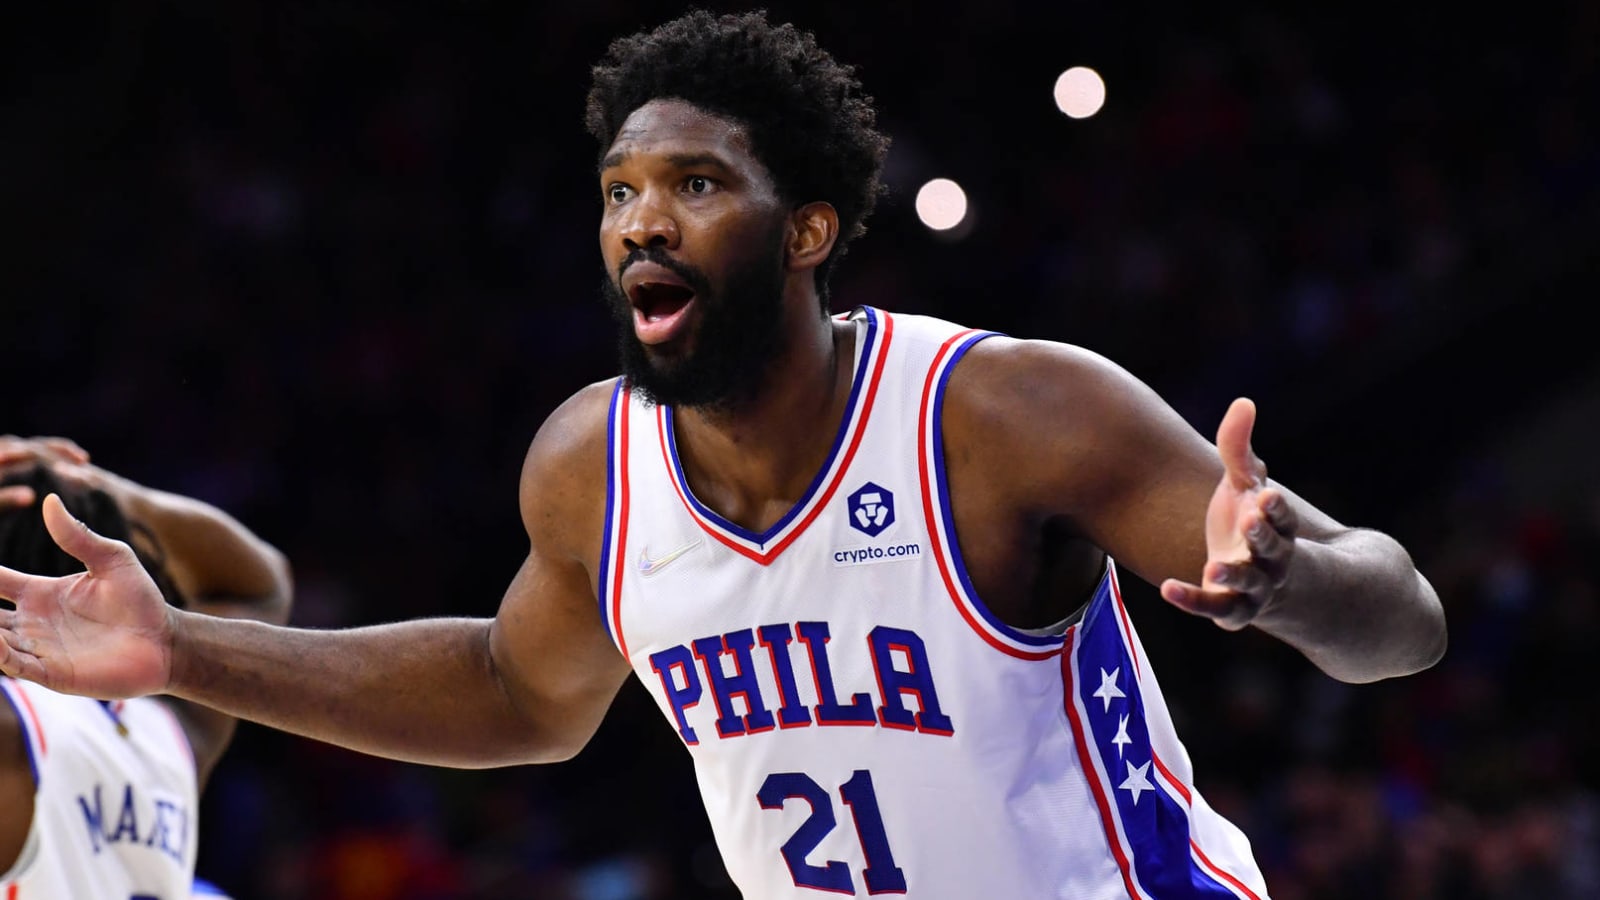 Embiid, 76ers trying to find footing after COVID issues